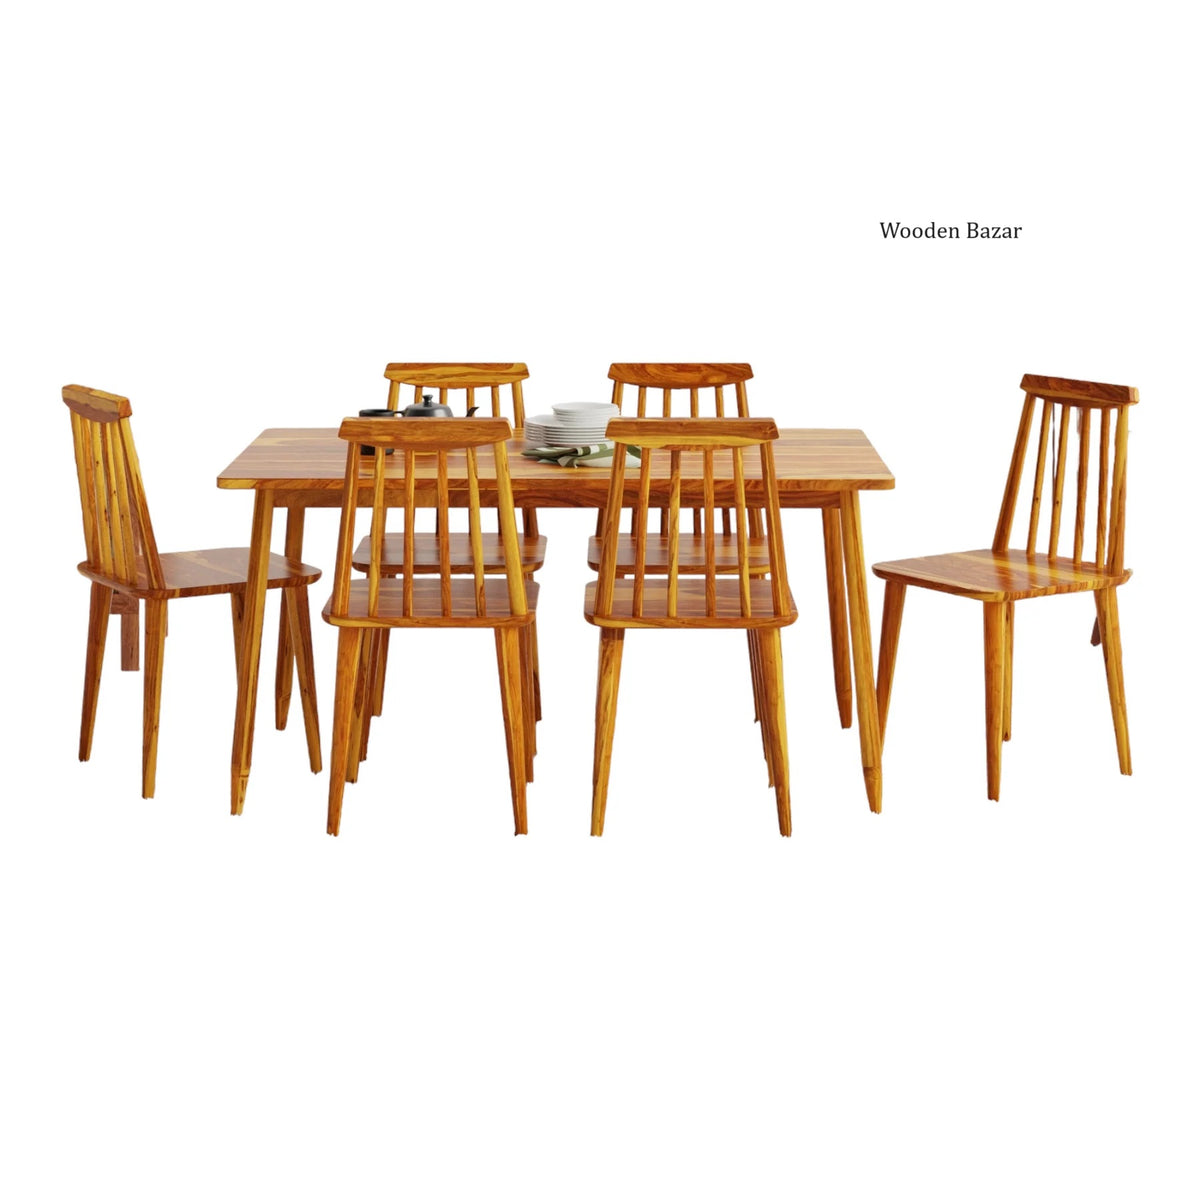 Antique 6-Seater dining table set with chairs by Wooden Bazar